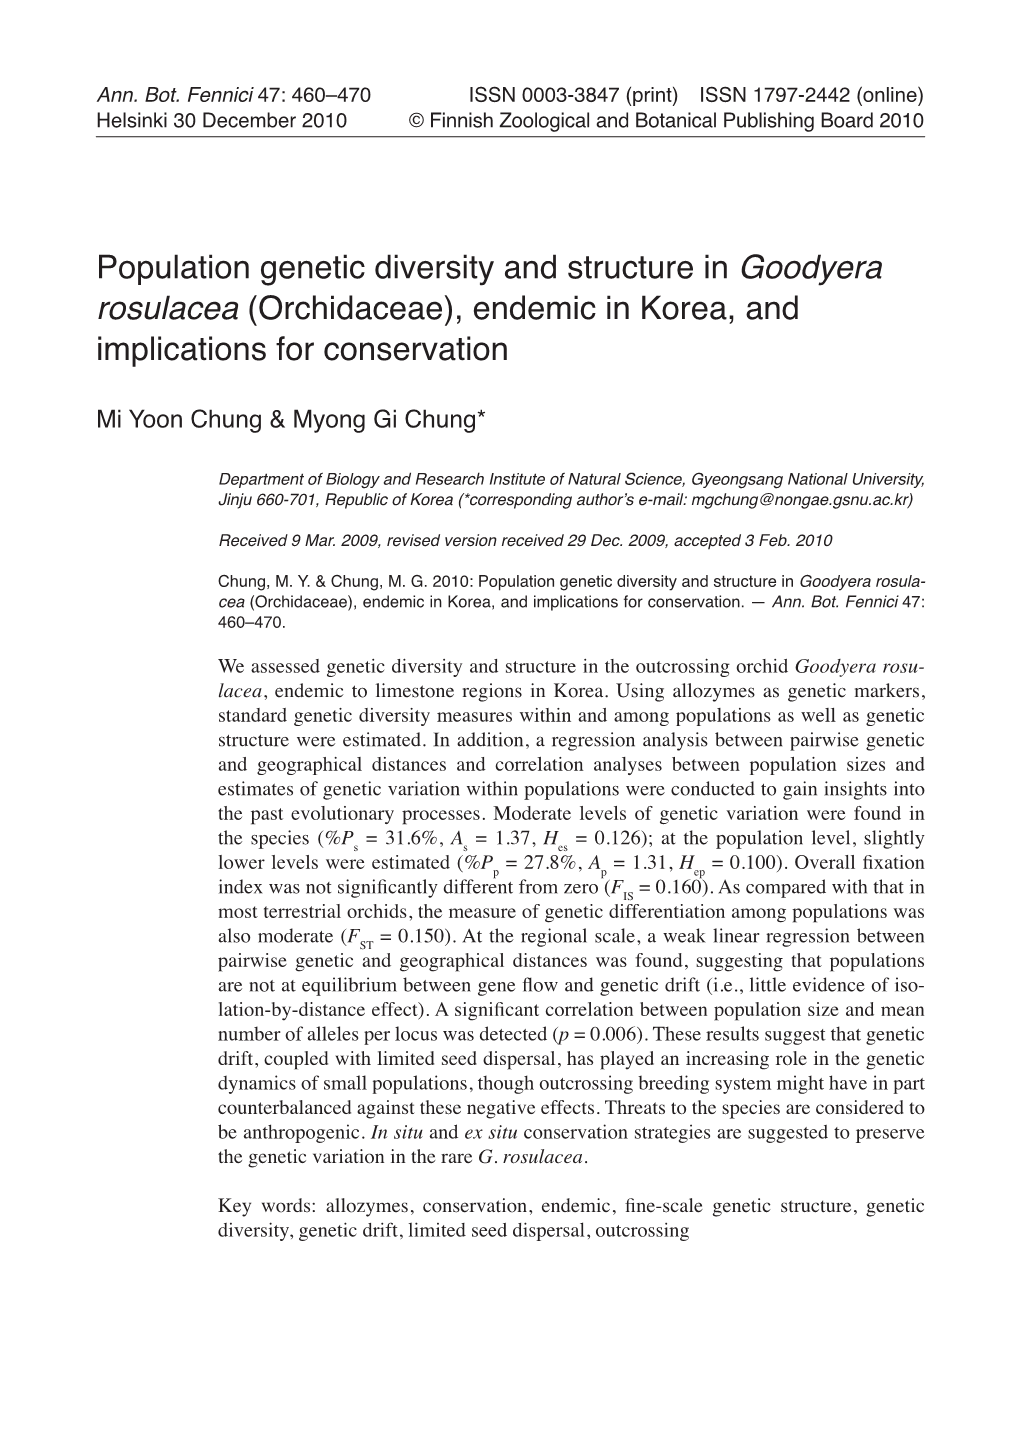 Population Genetic Diversity and Structure in Goodyera Rosulacea (Orchidaceae), Endemic in Korea, and Implications for Conservation